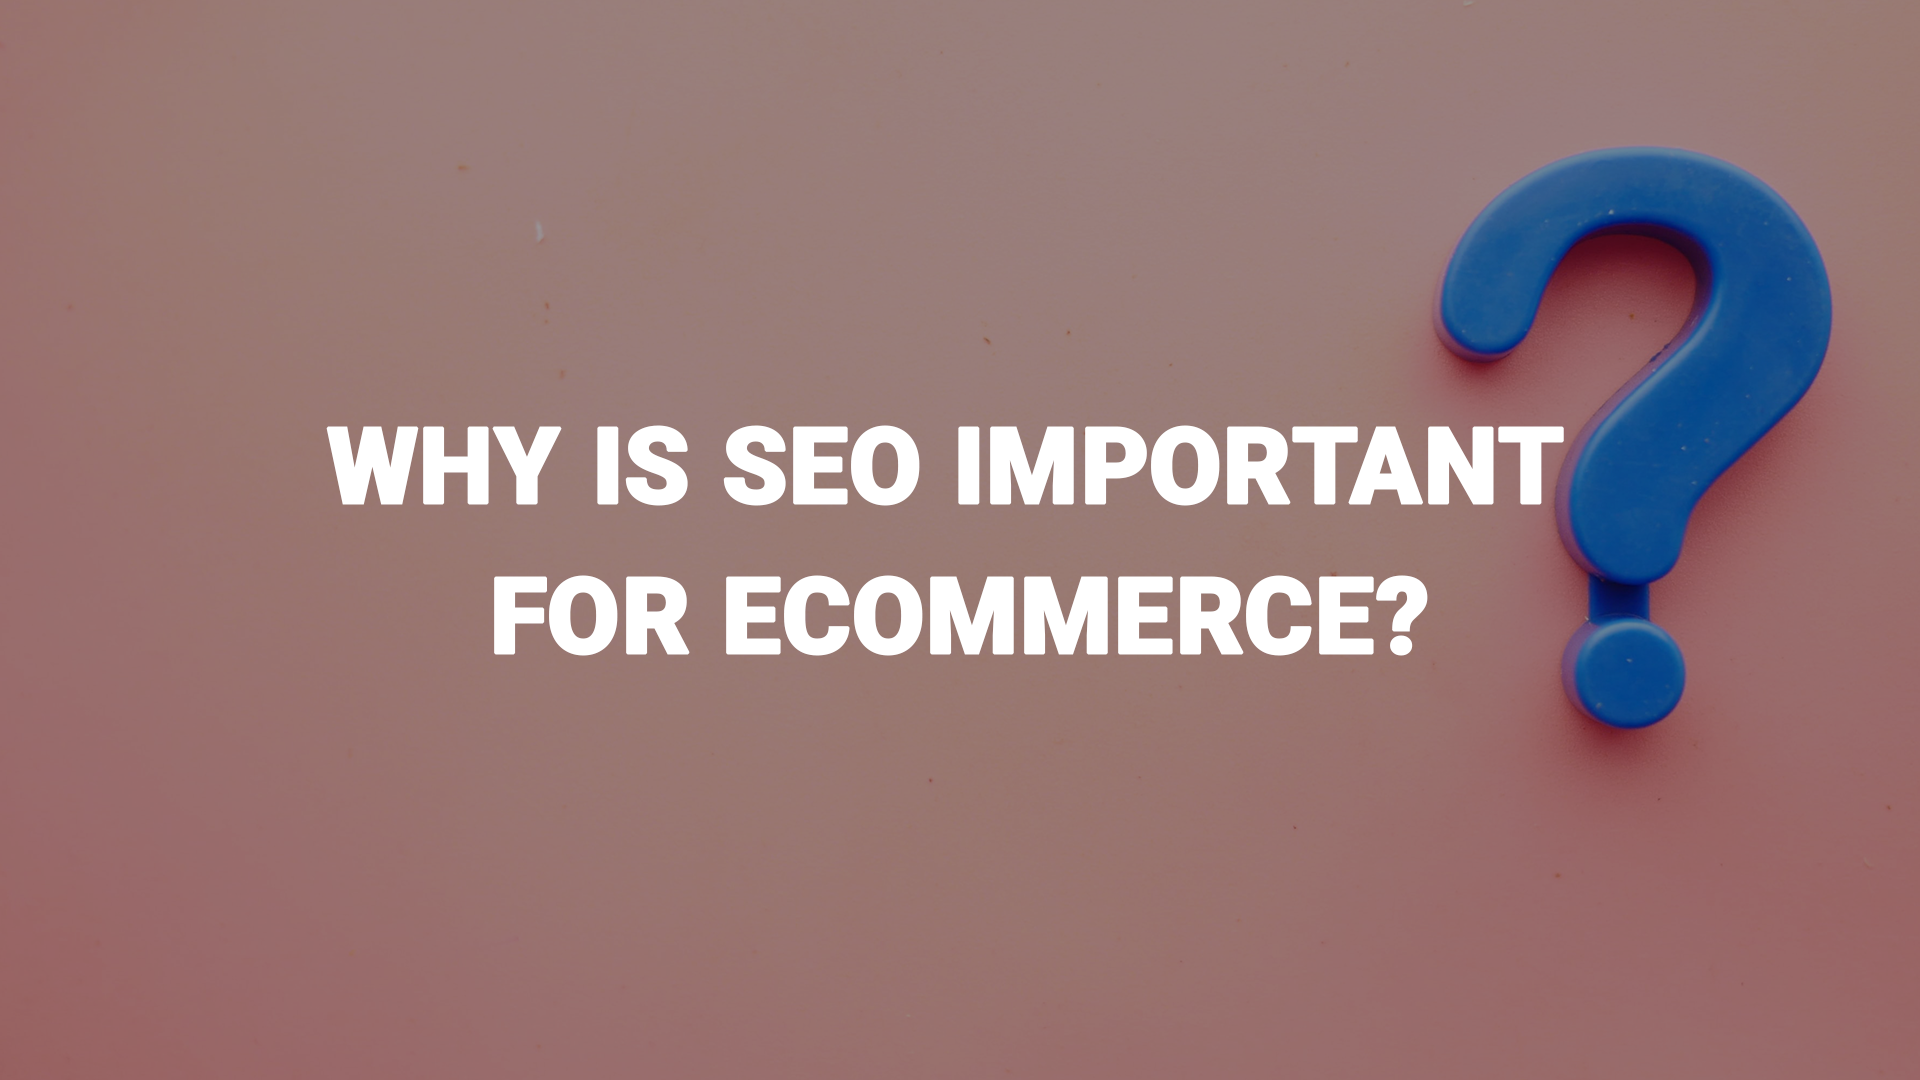 Why is SEO important for Ecommerce?